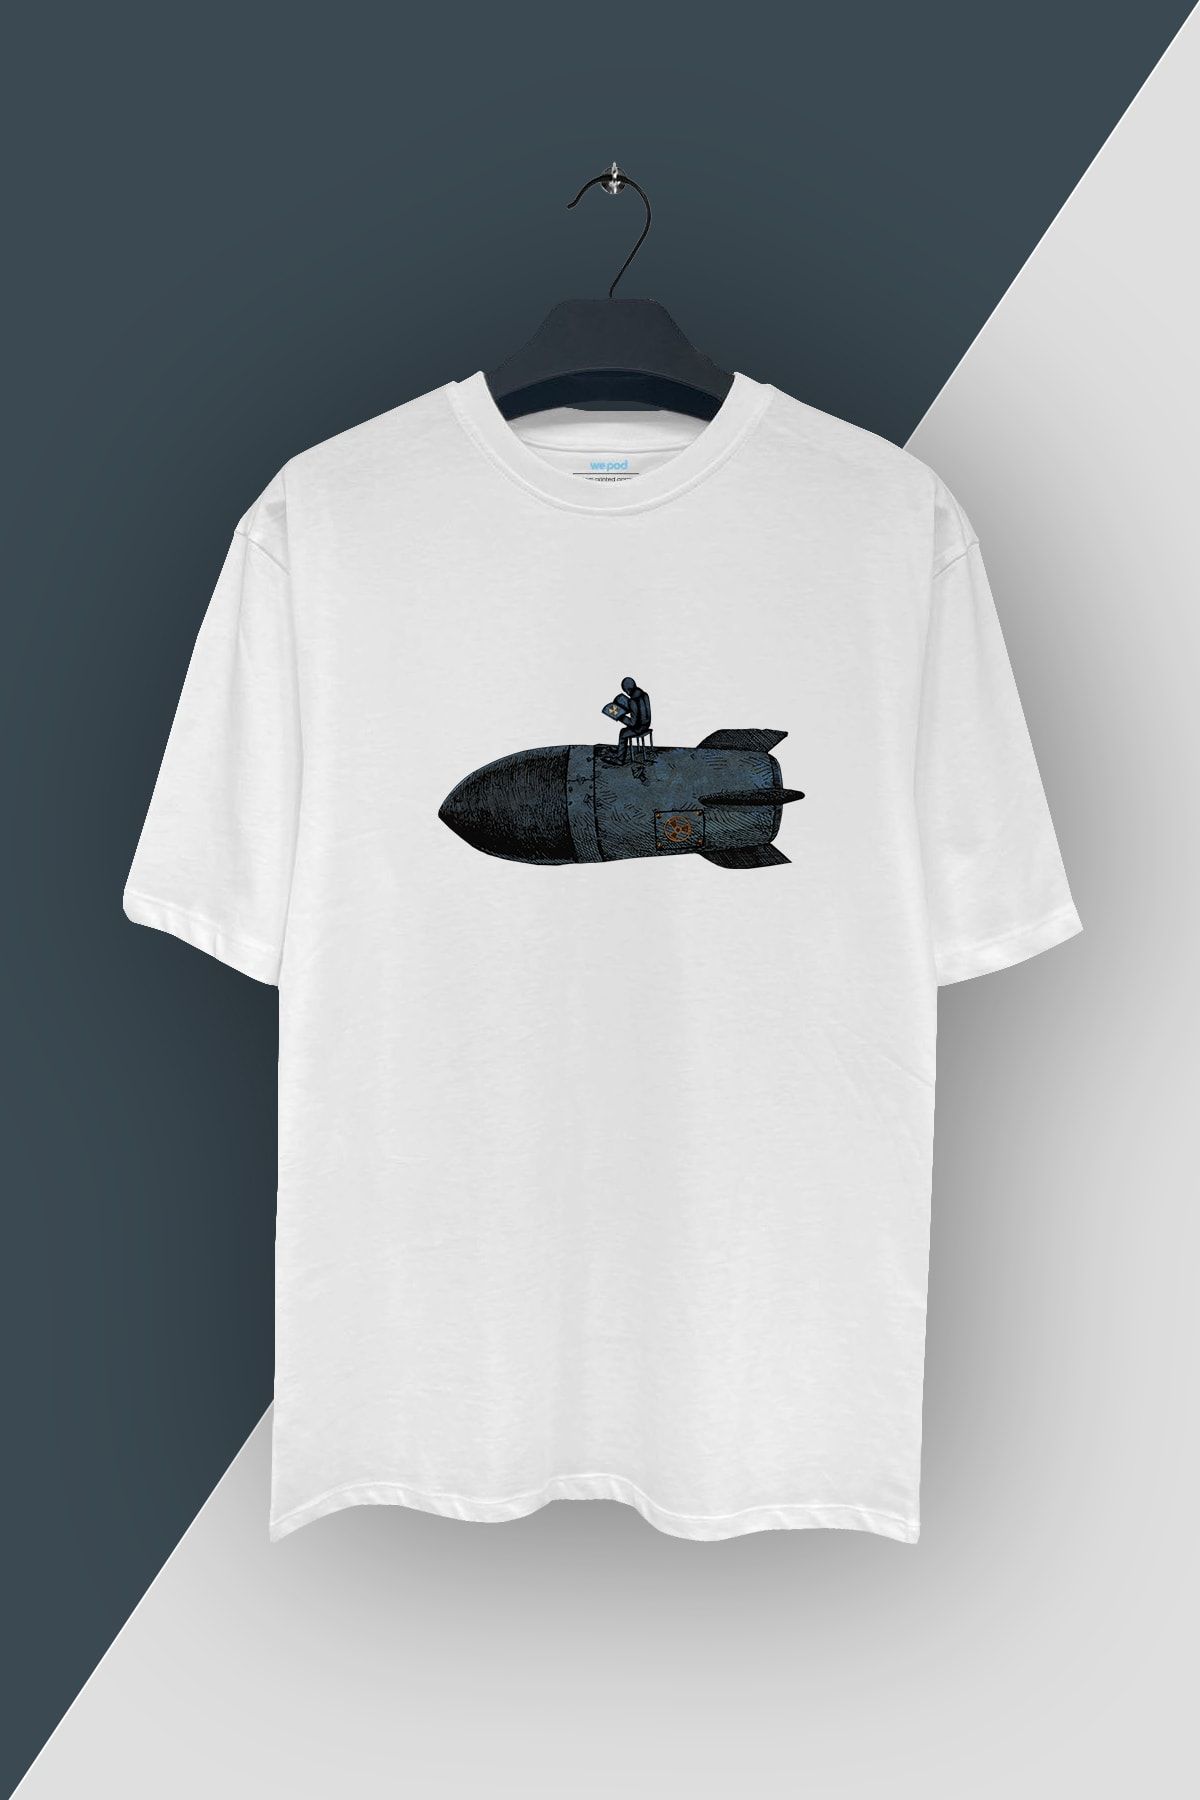 WePOD Missile Engineer Relaxed Fit By Beyaz Unisex Tshirt